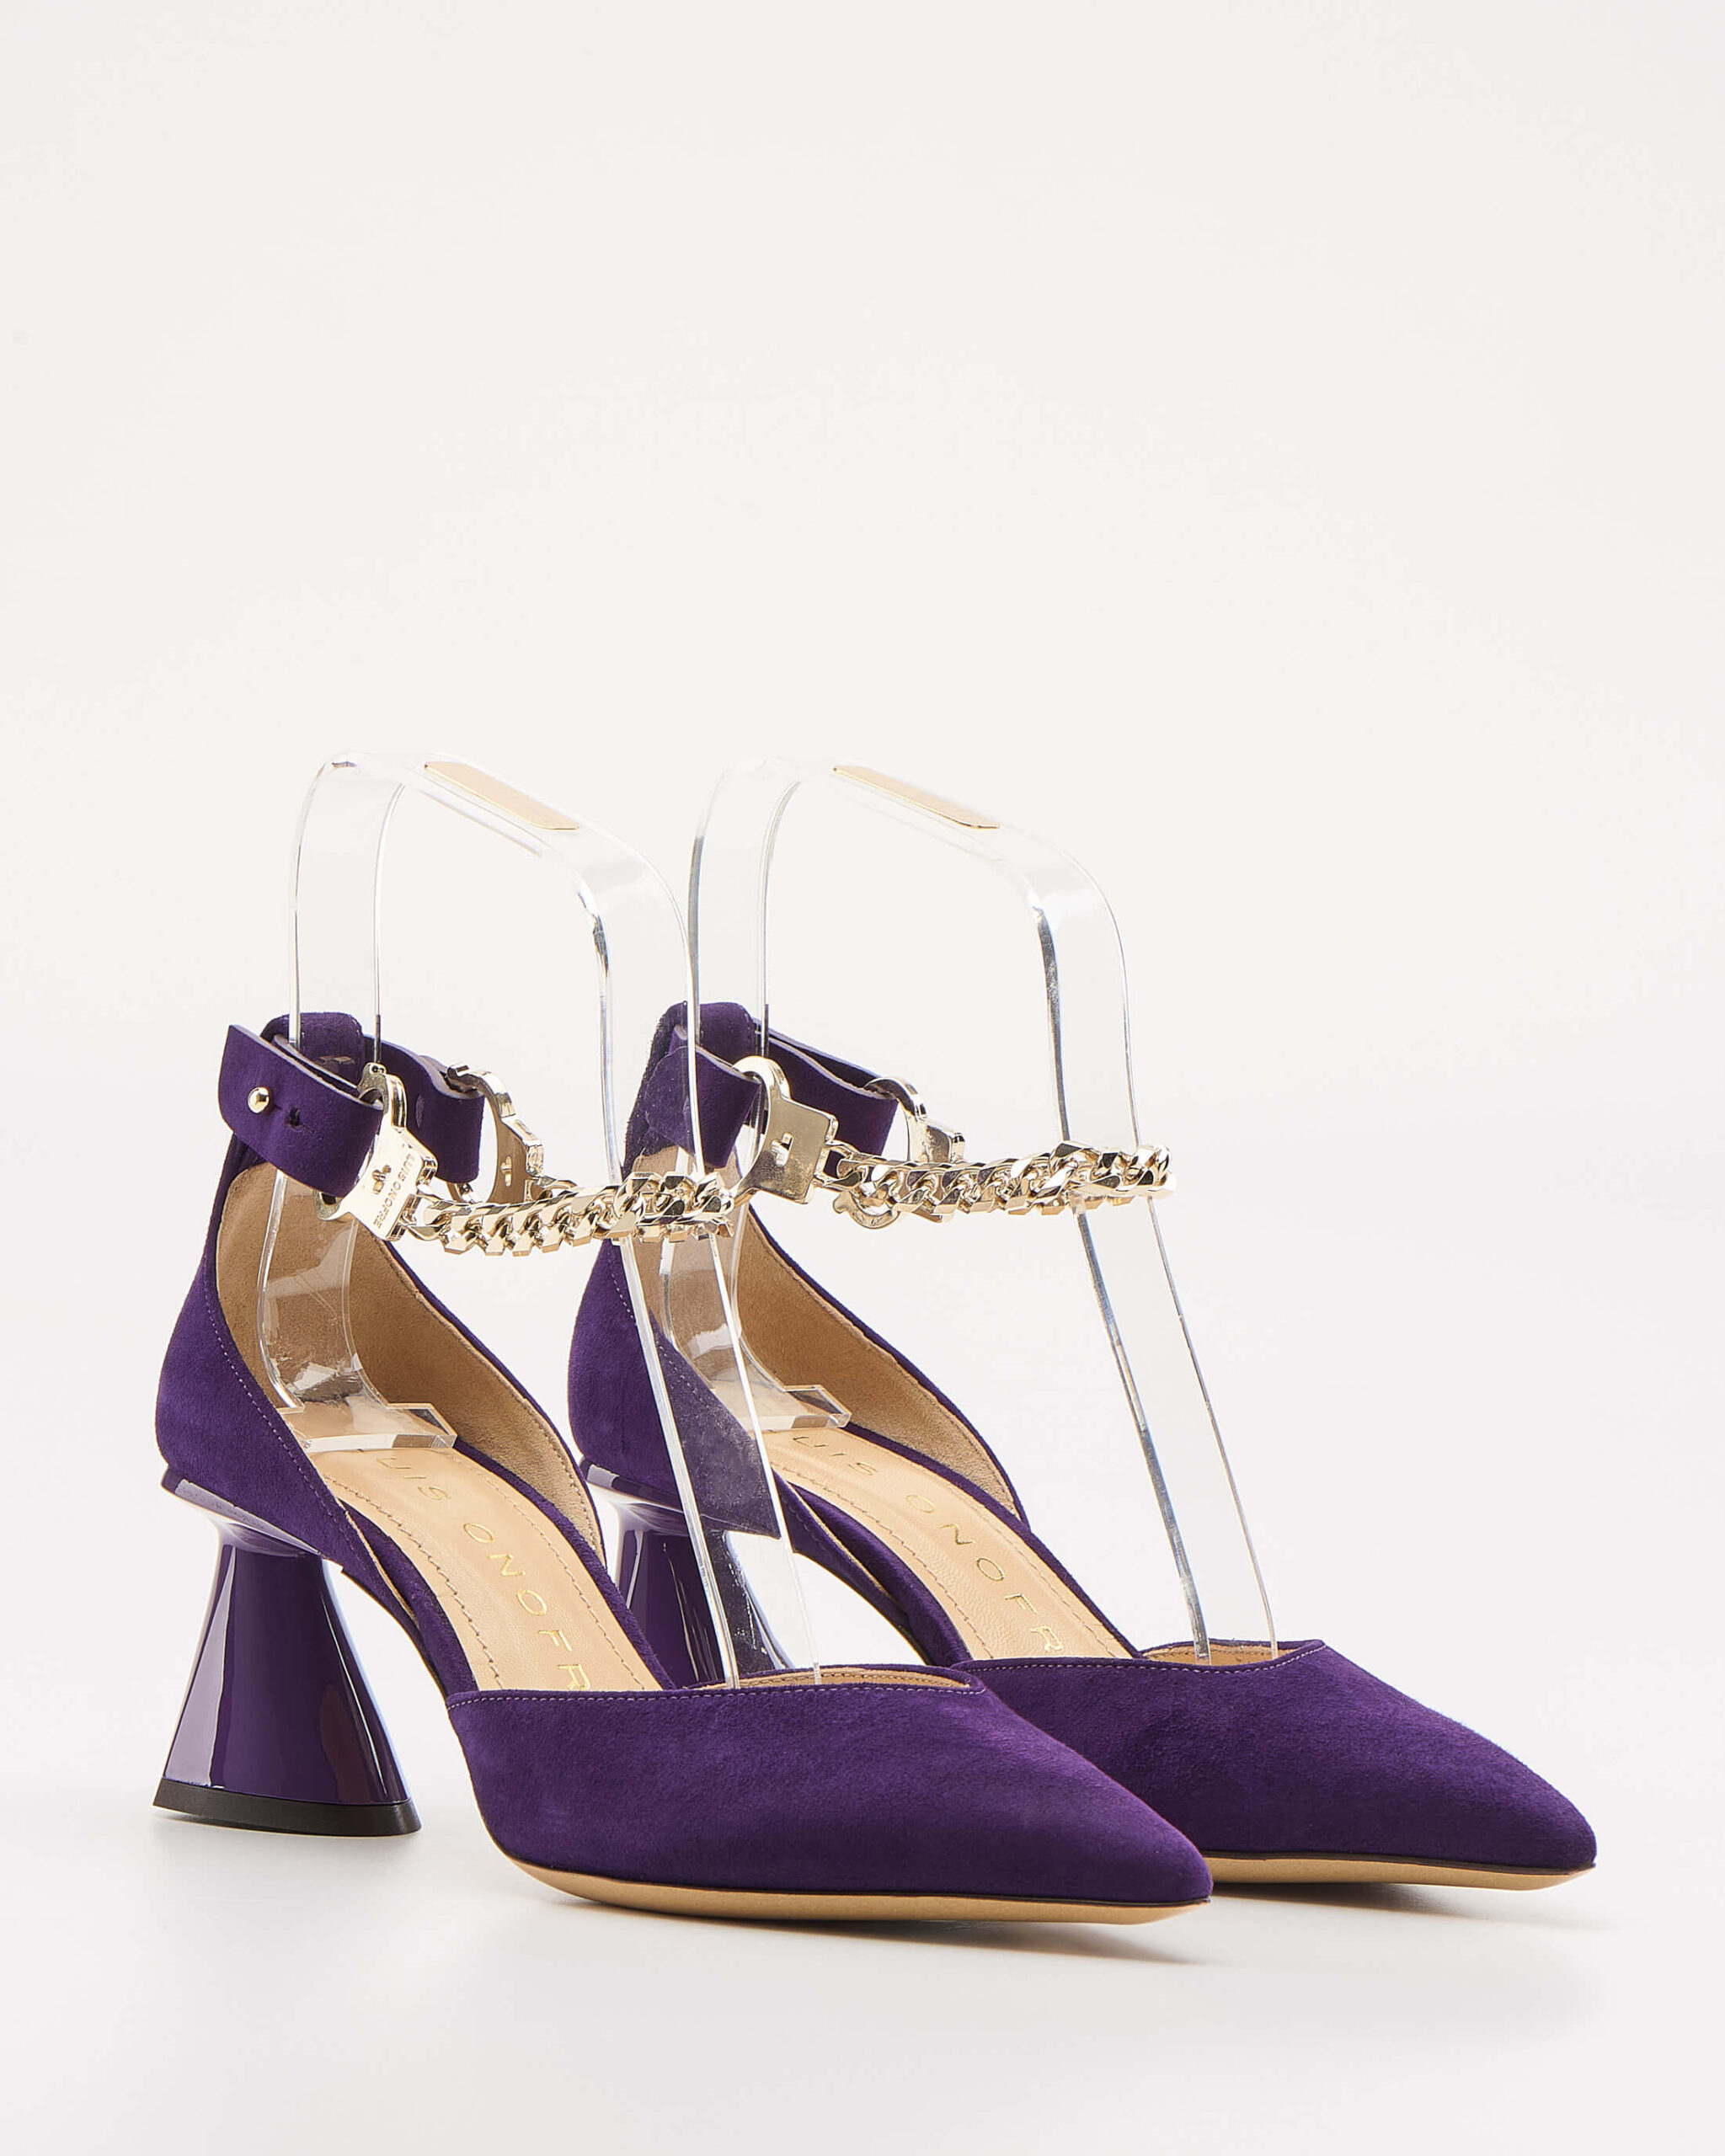 Luis Onofre Portuguese Shoes FW23 – Enigma Collection – 5492_02 – RIDDLE Purple-2